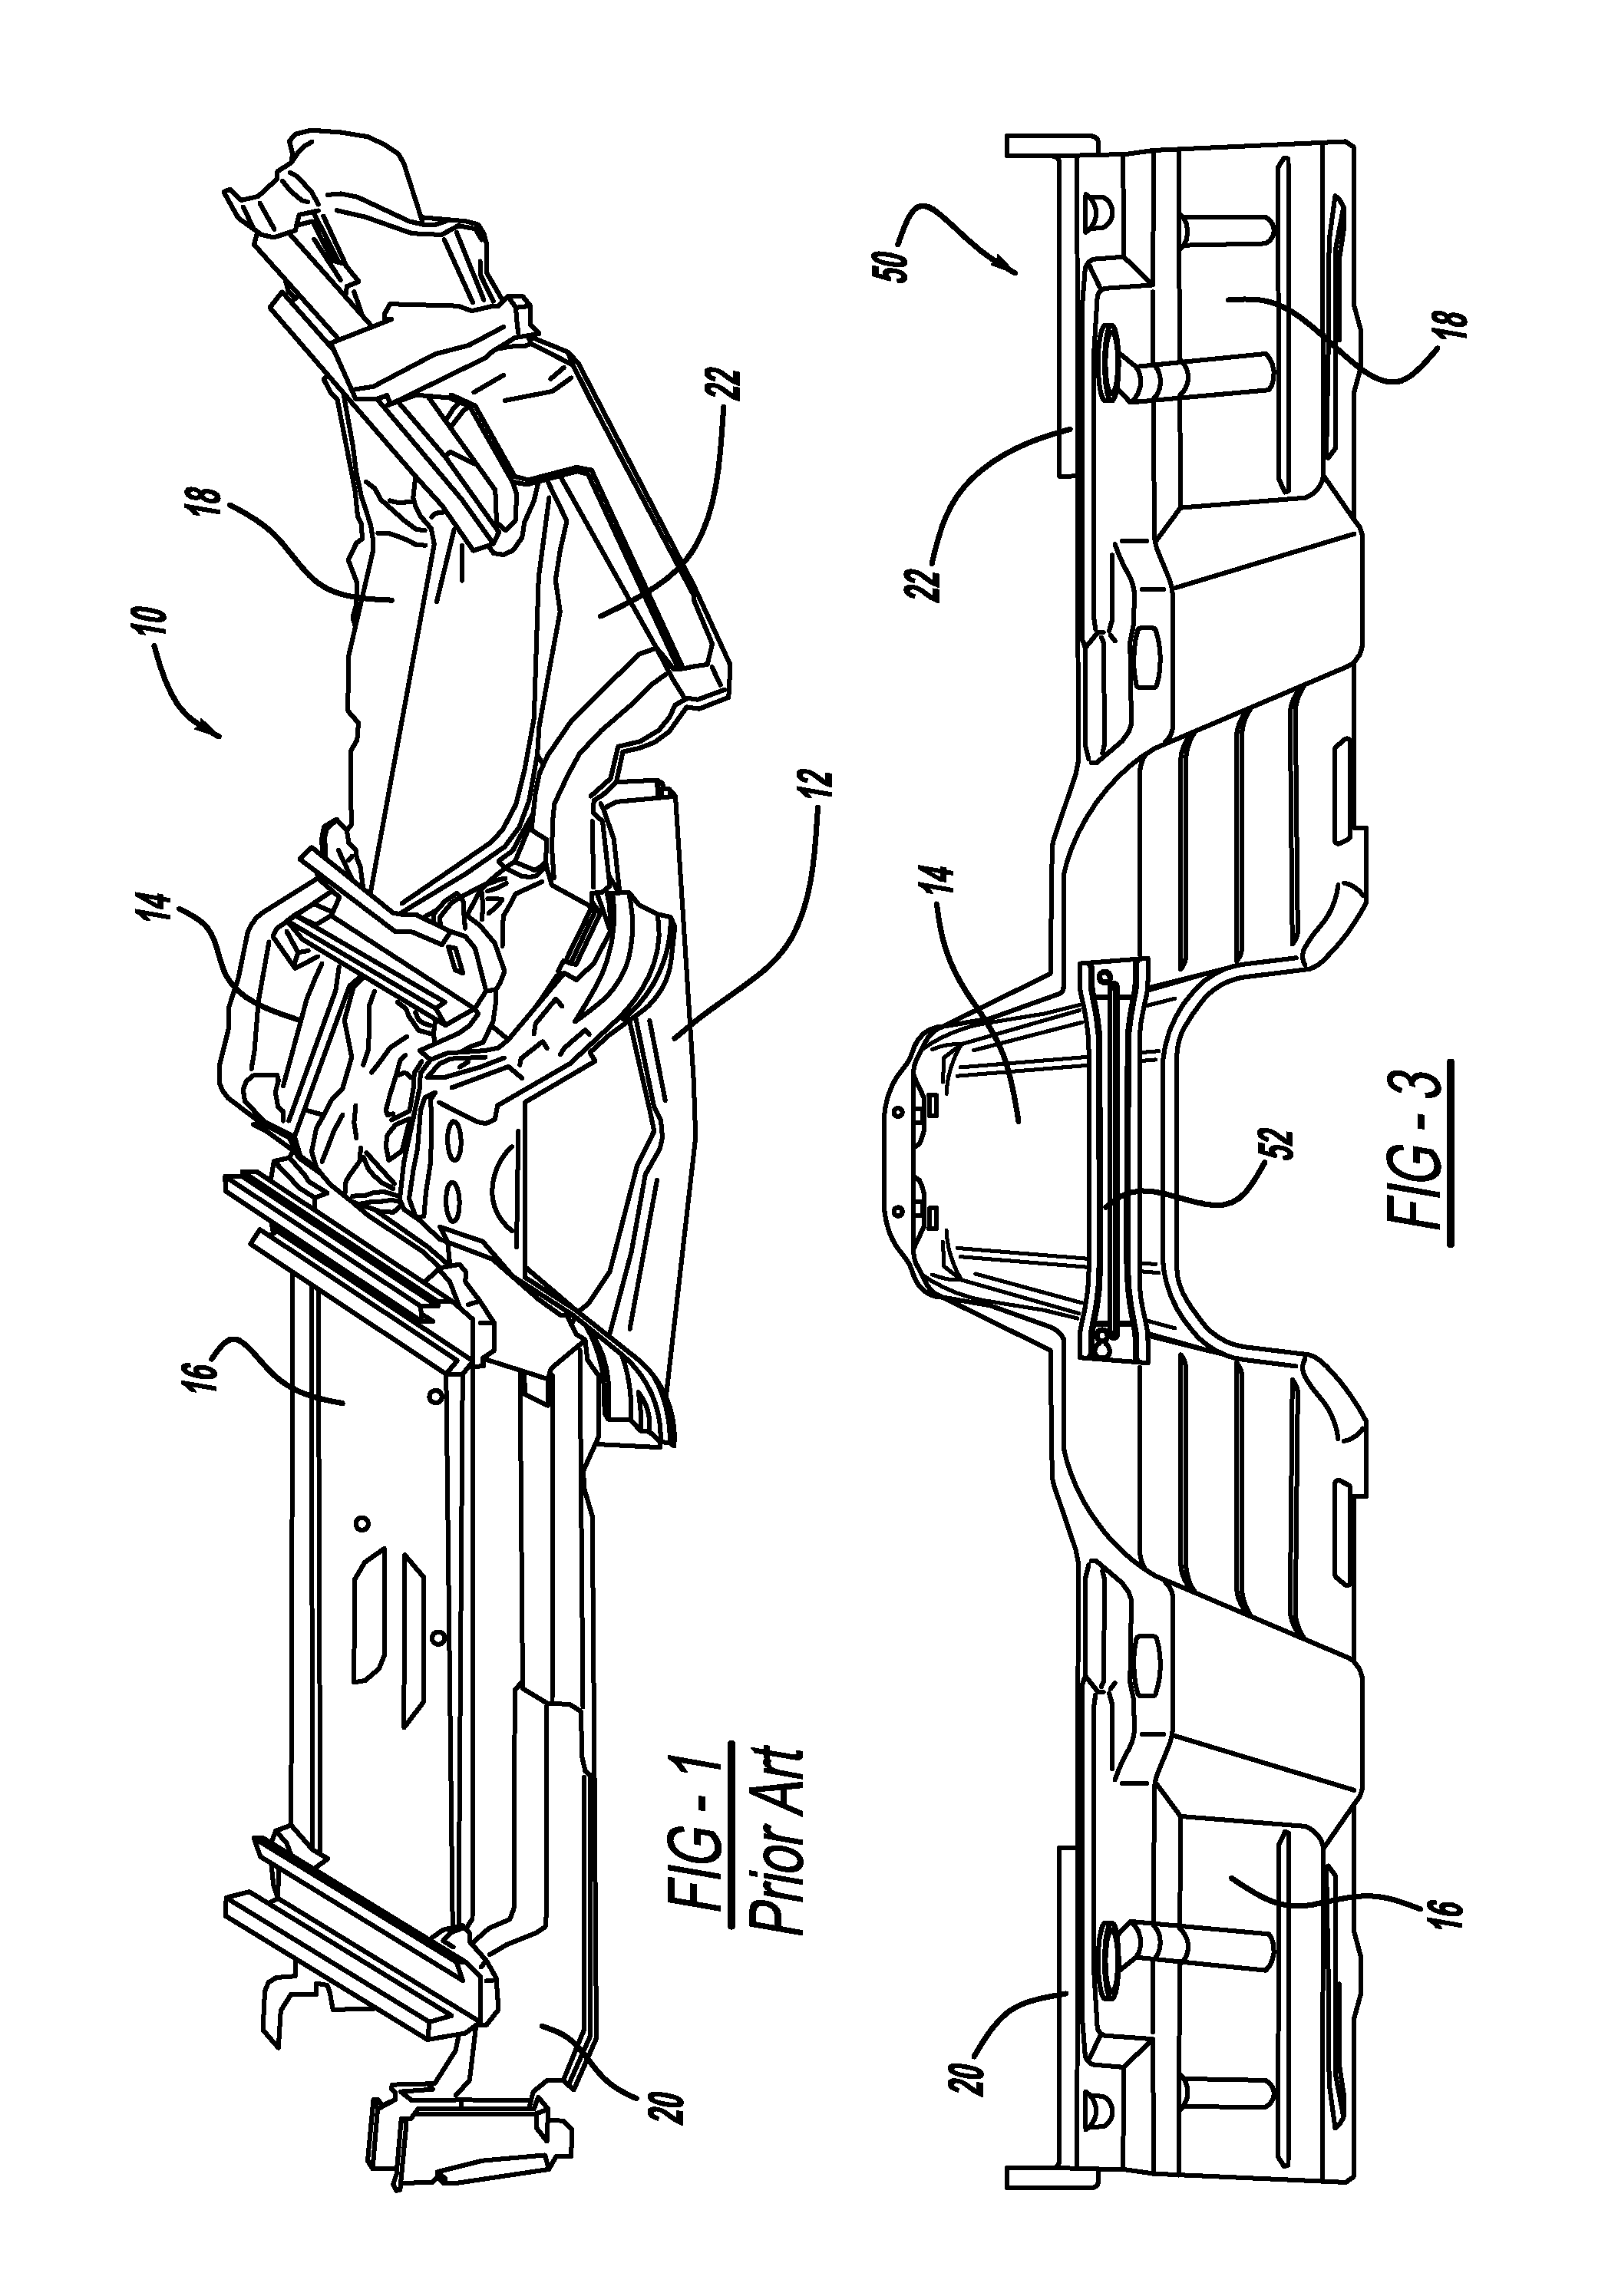 Releasable tunnel brace for a vehicle